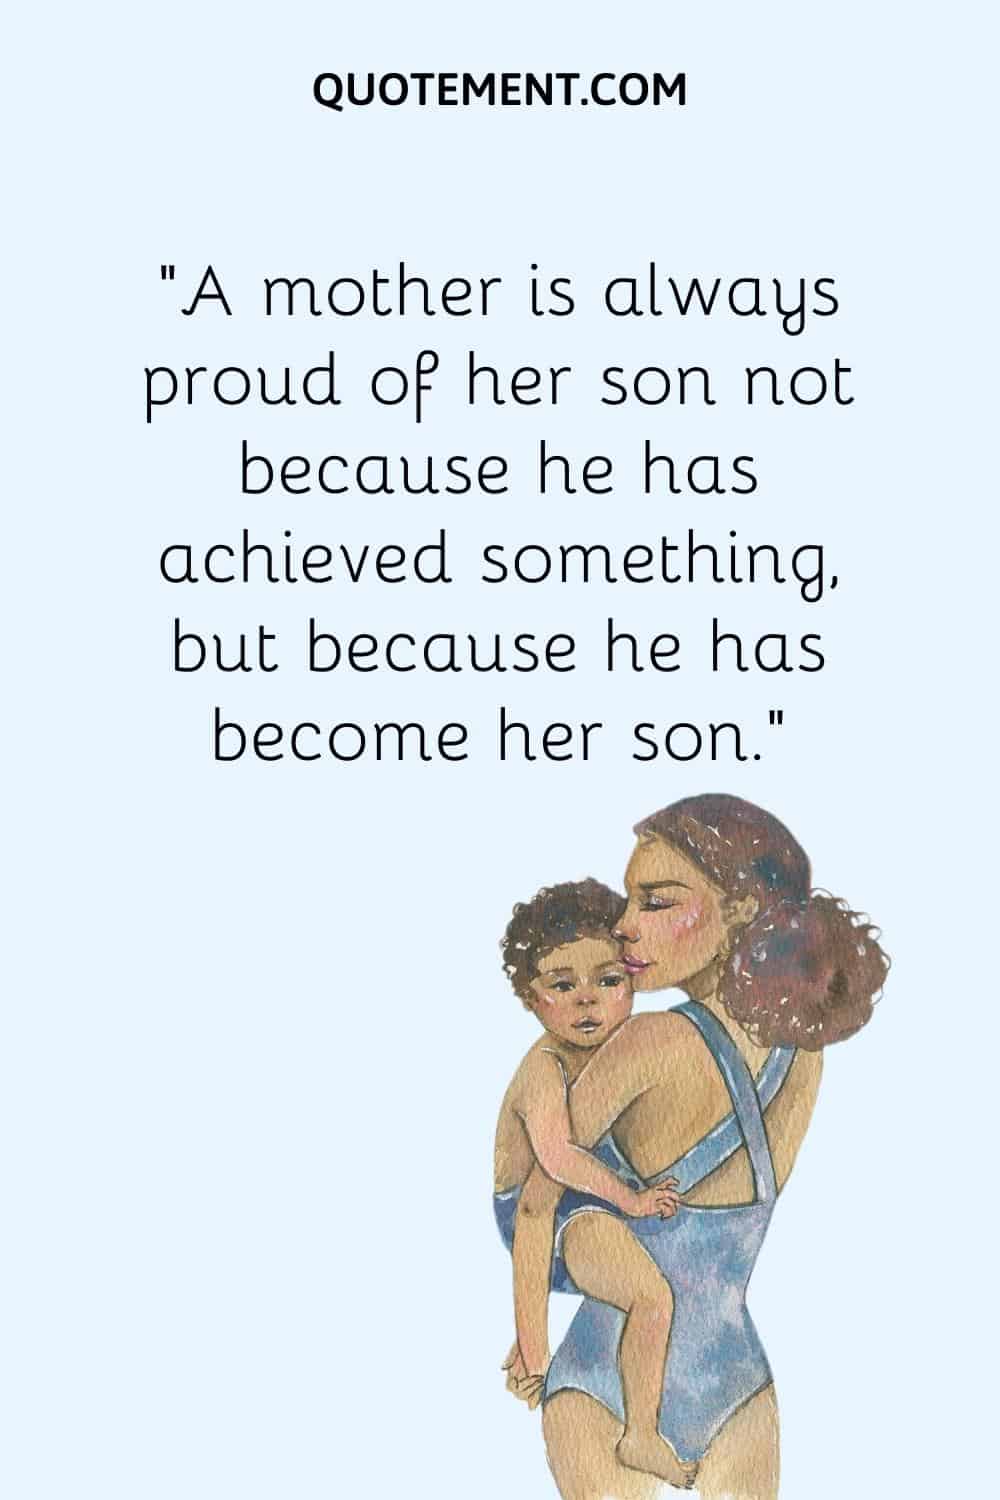 “A mother is always proud of her son not because he has achieved something, but because he has become her son.”